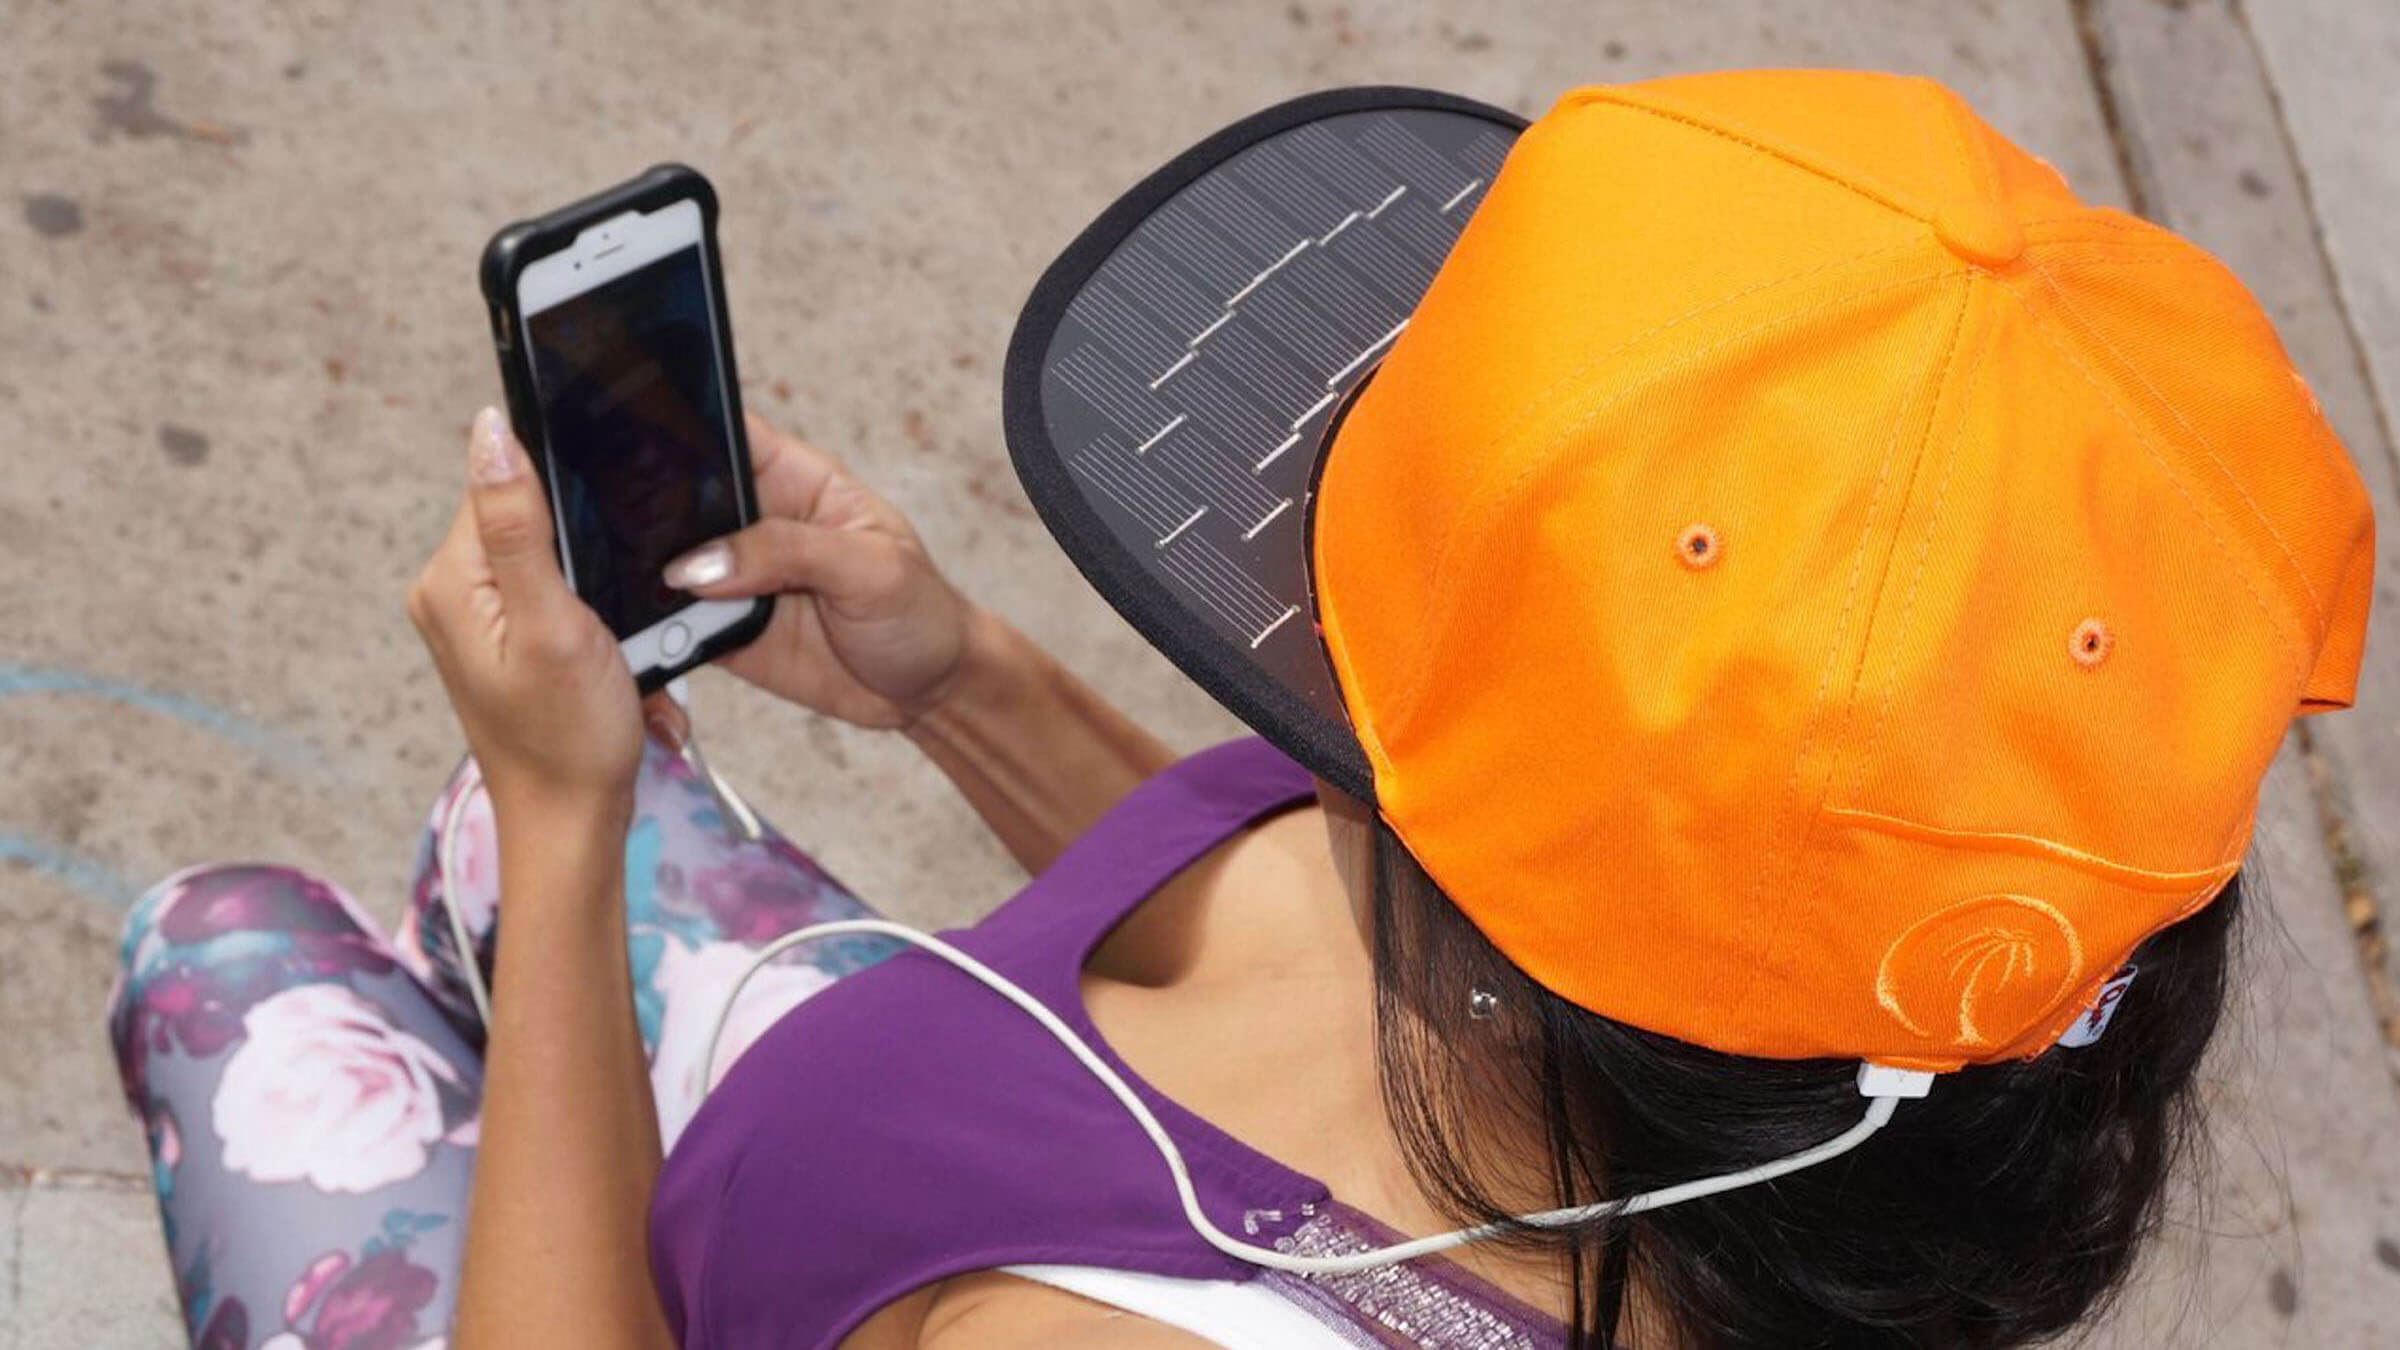 SolSol's baseball hat can charge your phone using solar power